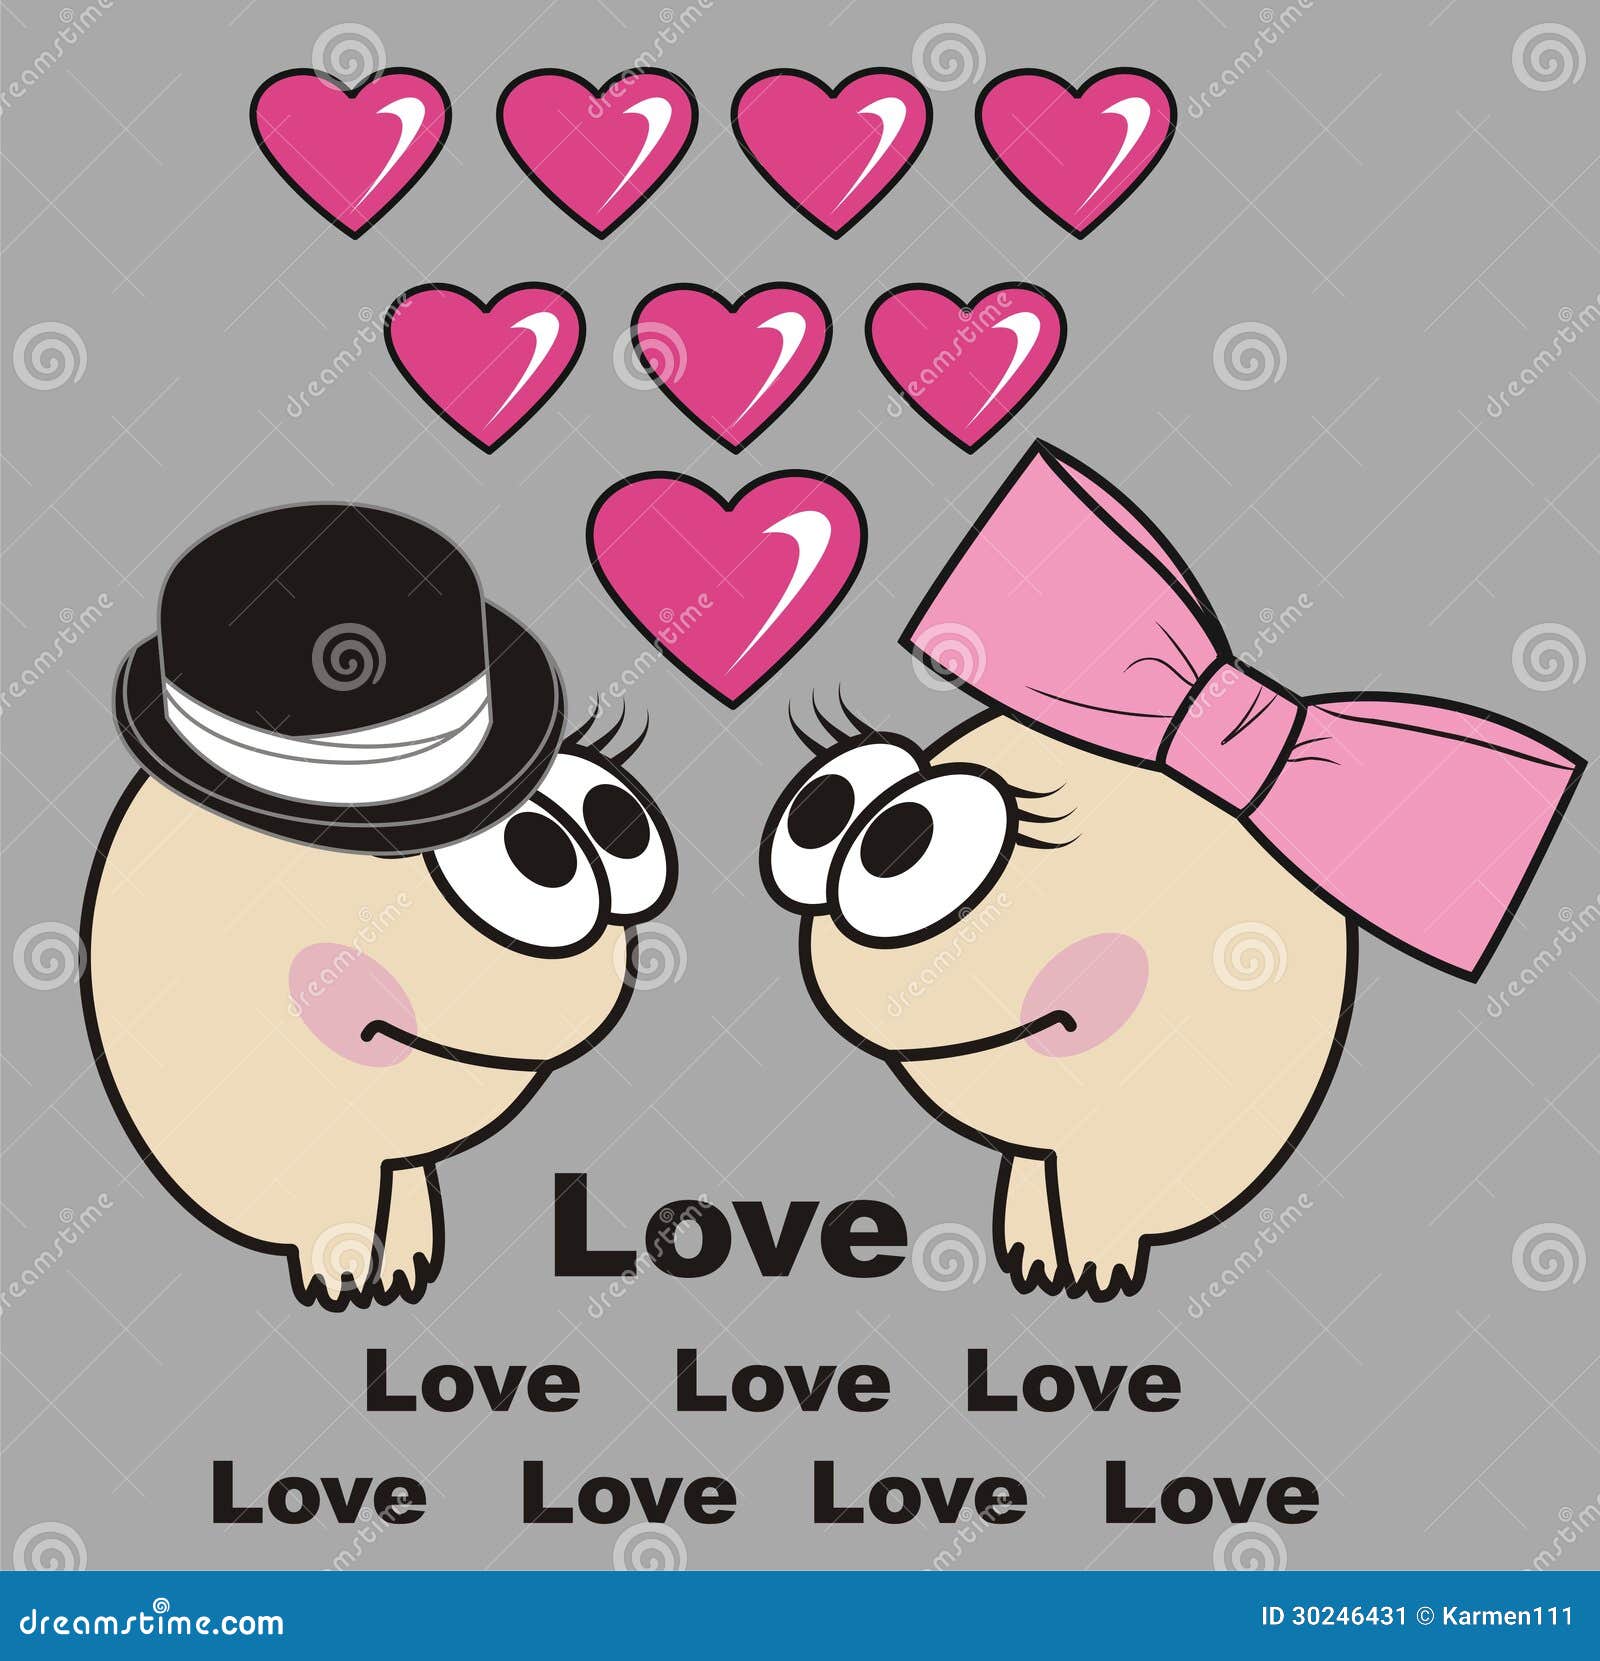 animated love cards